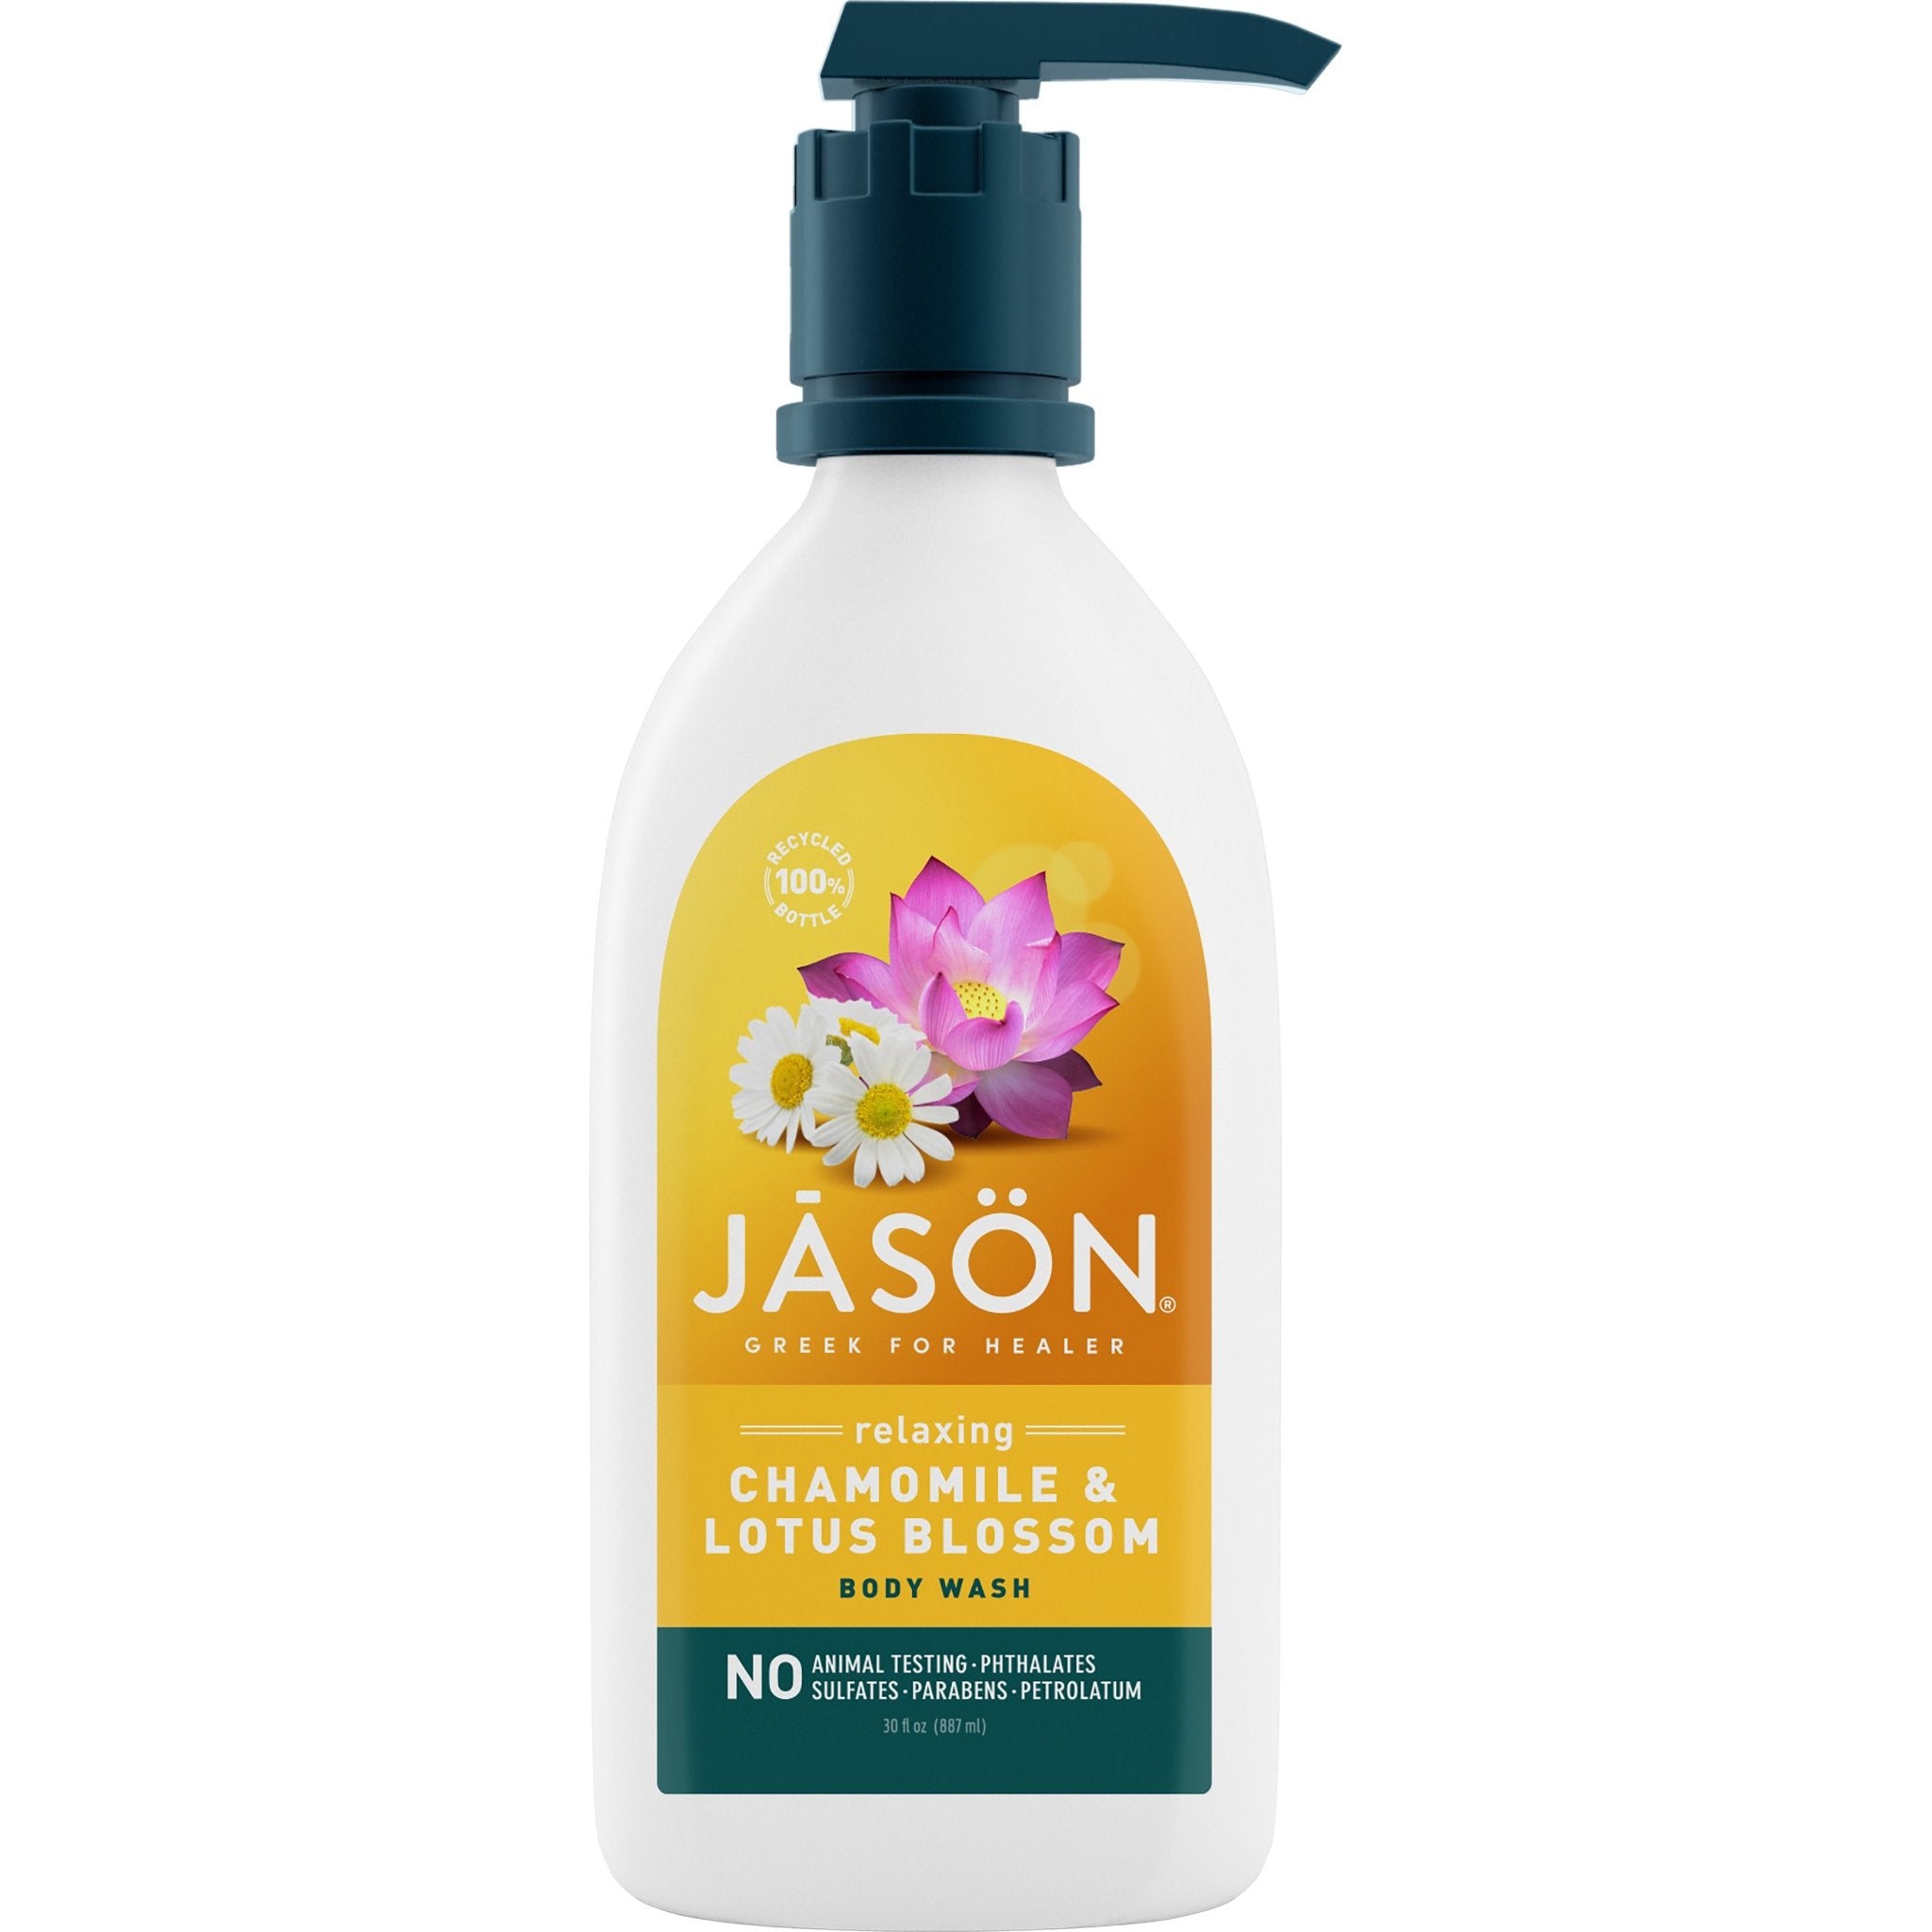 Relaxing Chamomile & Lotus Blossom Body Wash - mypure.co.uk